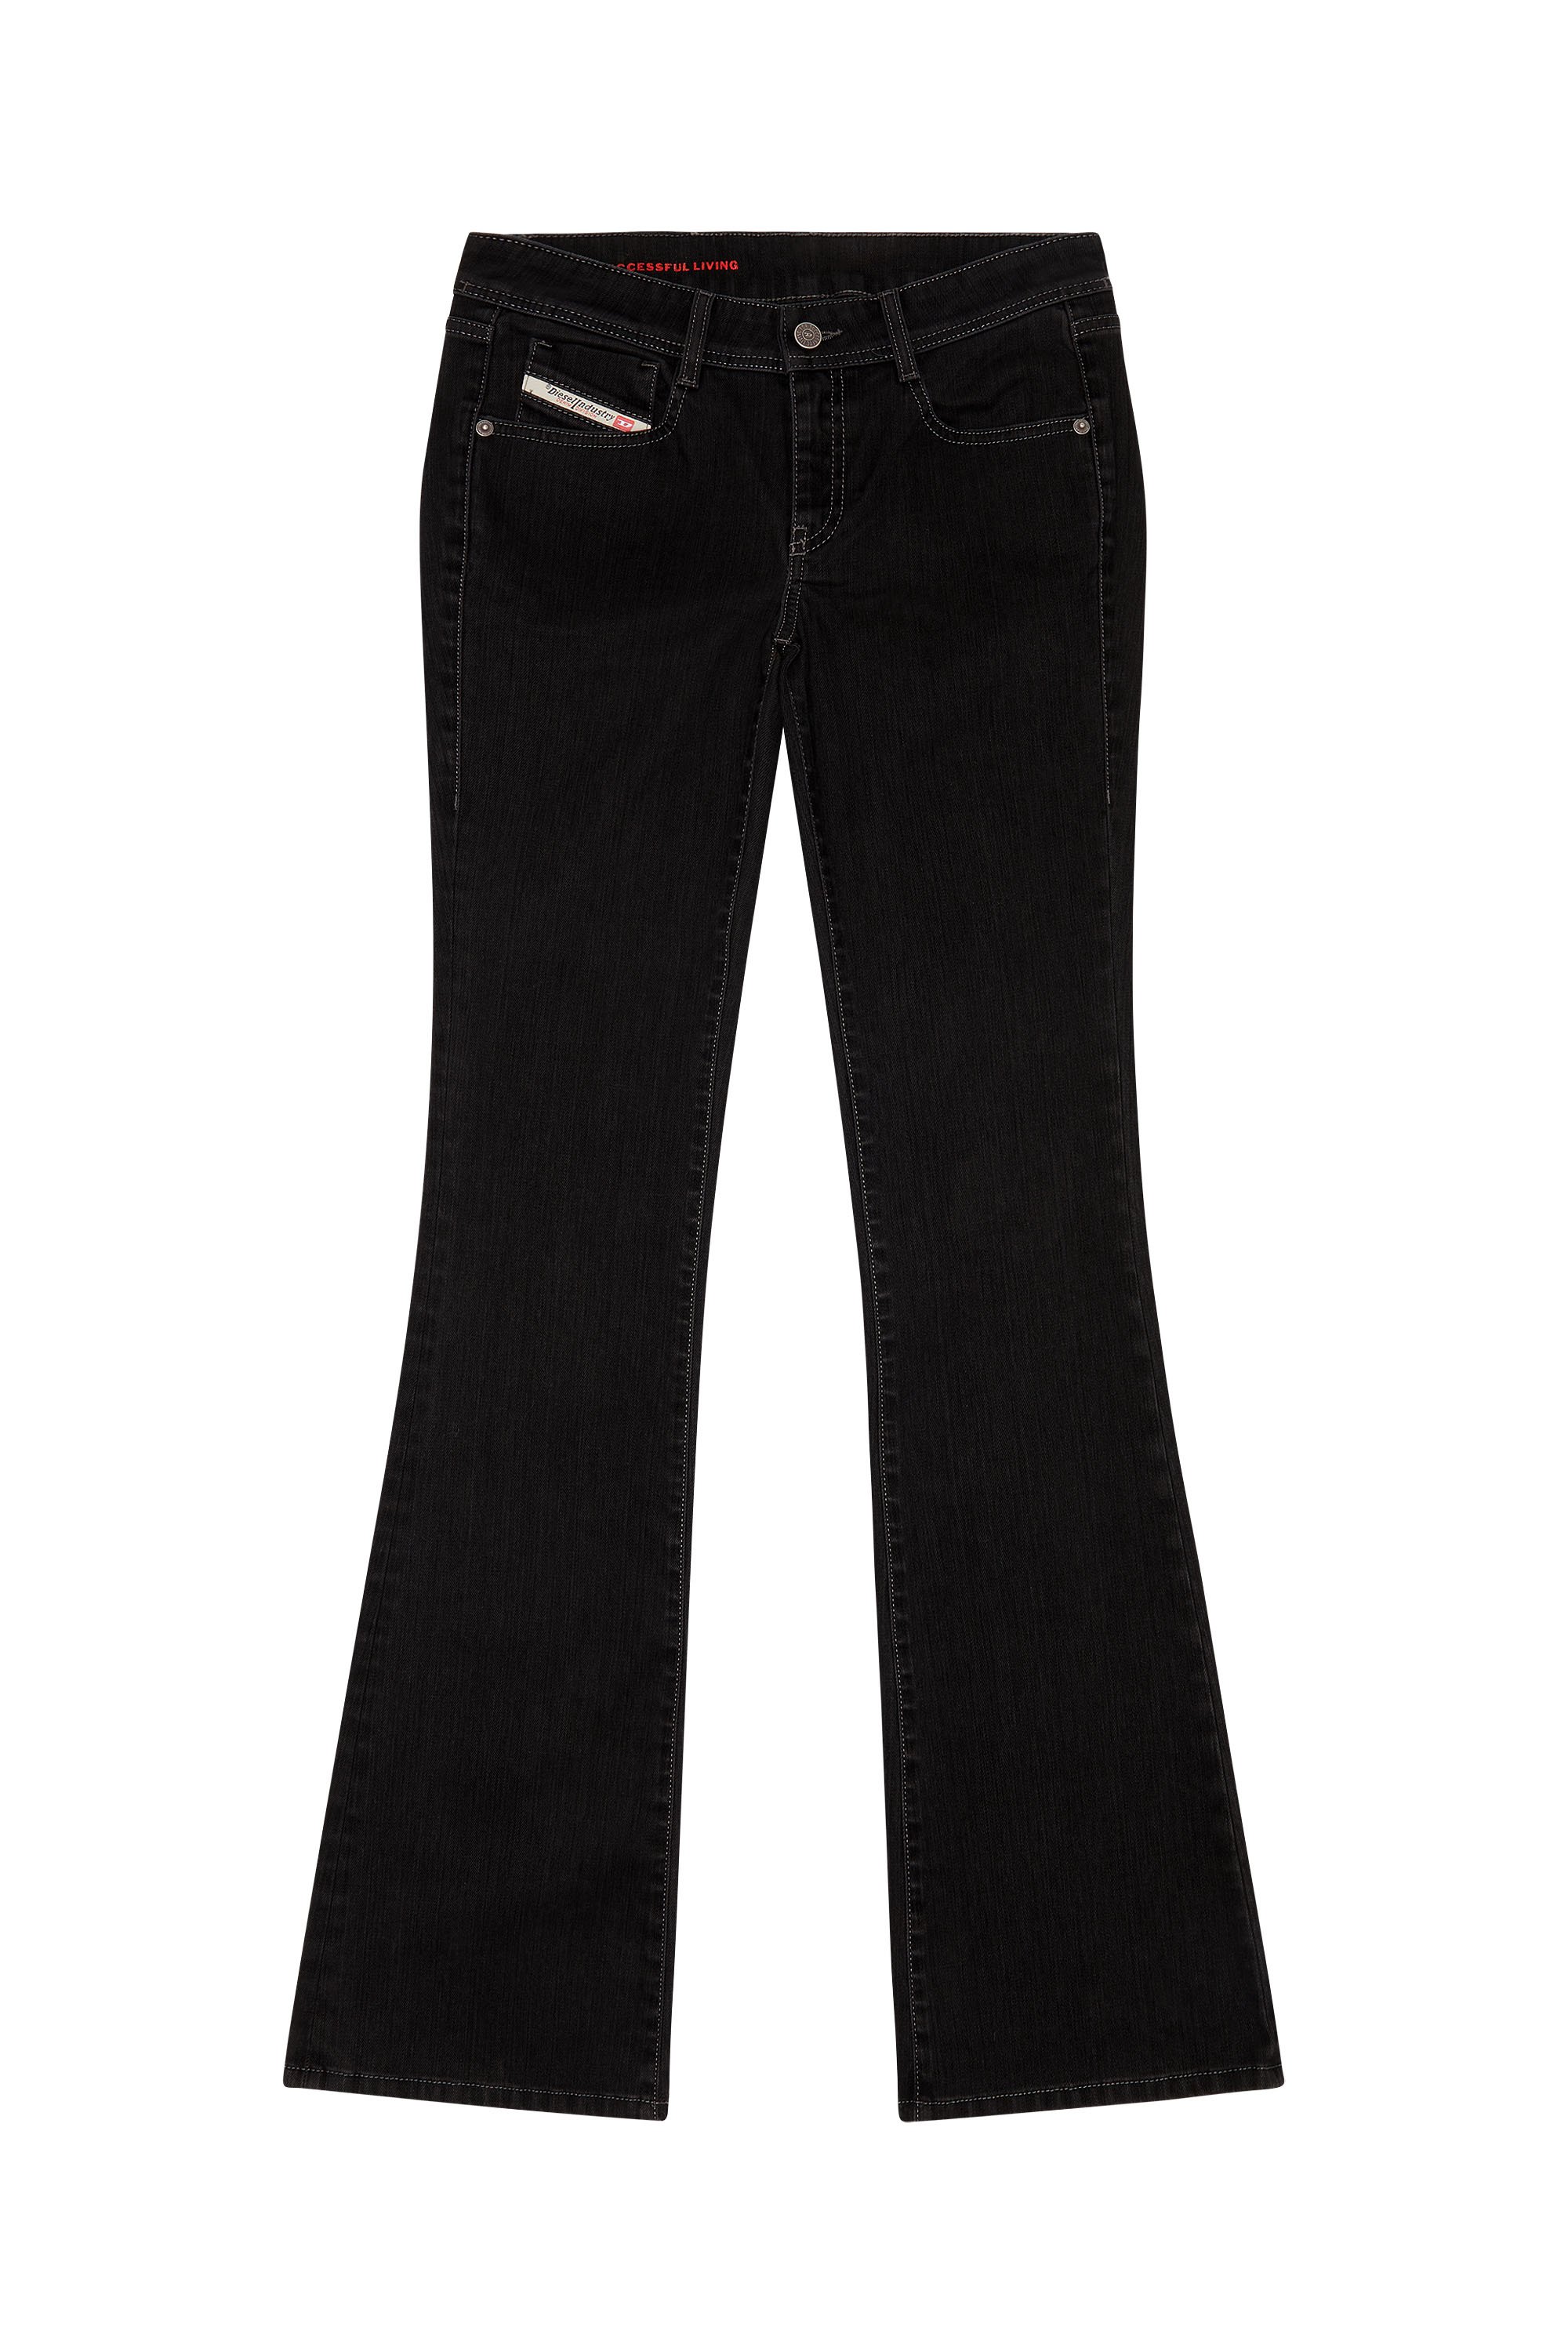 1969 D-EBBEY 0IHAO Bootcut and Flare Jeans, Black/Dark grey - Jeans